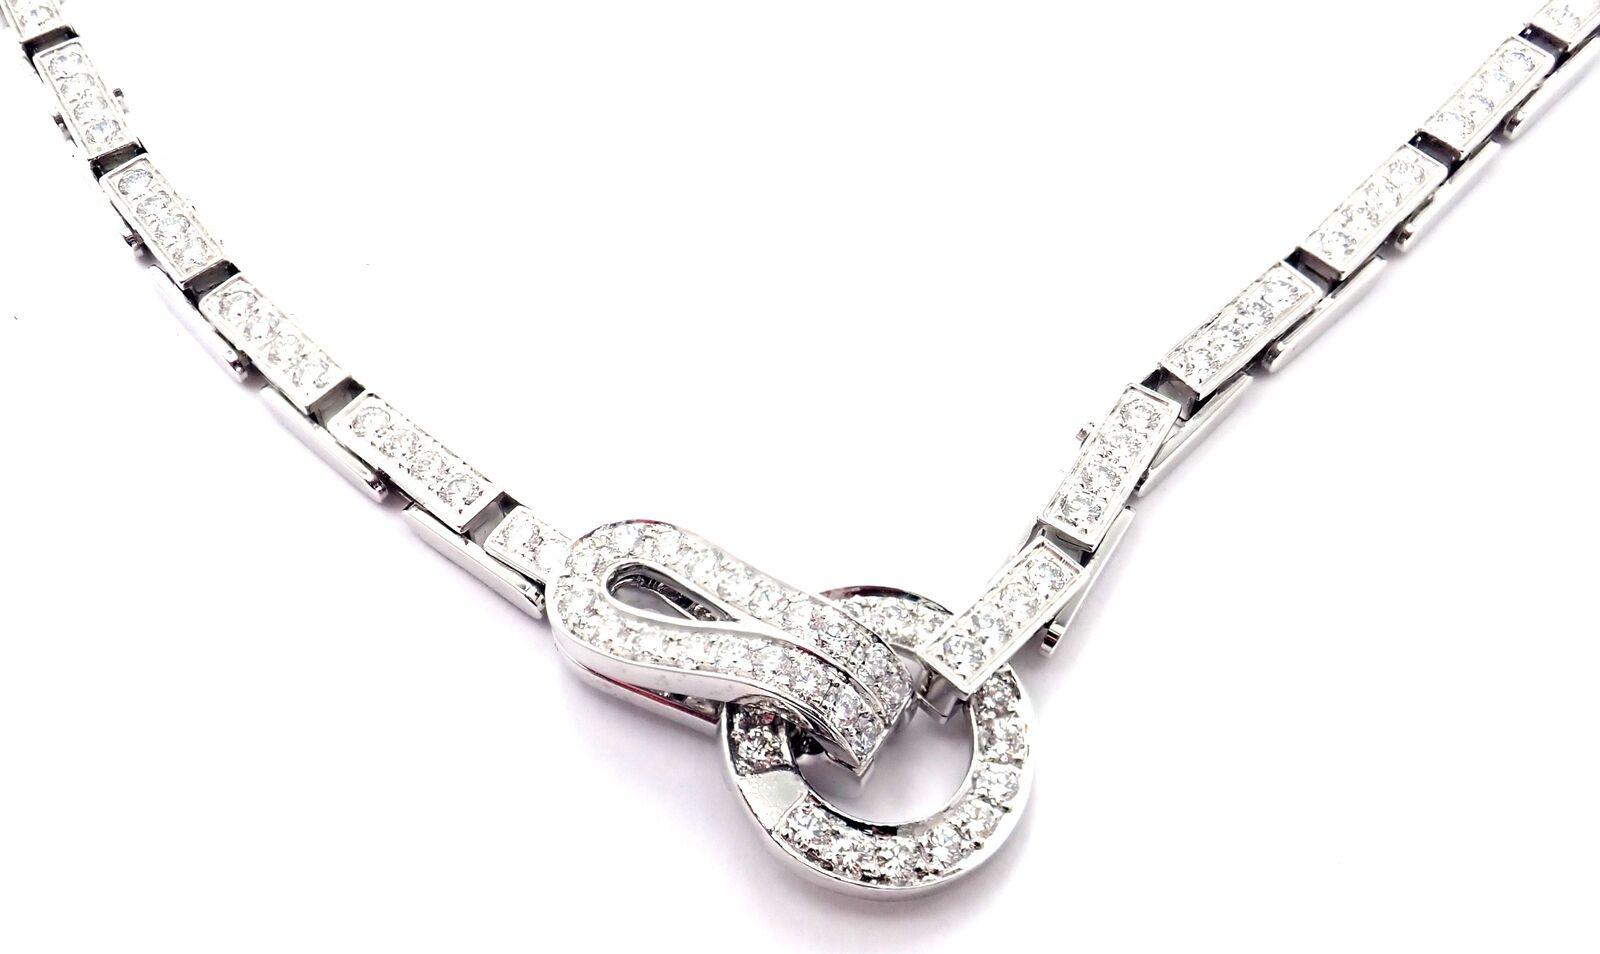 18k White Gold Diamond Agrafe Necklace by Cartier.
With Round Brilliant Cut Diamonds VVS1 clarity, E color total weight approximately 7.10ct
This necklace come with certificate of authenticity and a box from Cartier.
Details:
Length: 16.5